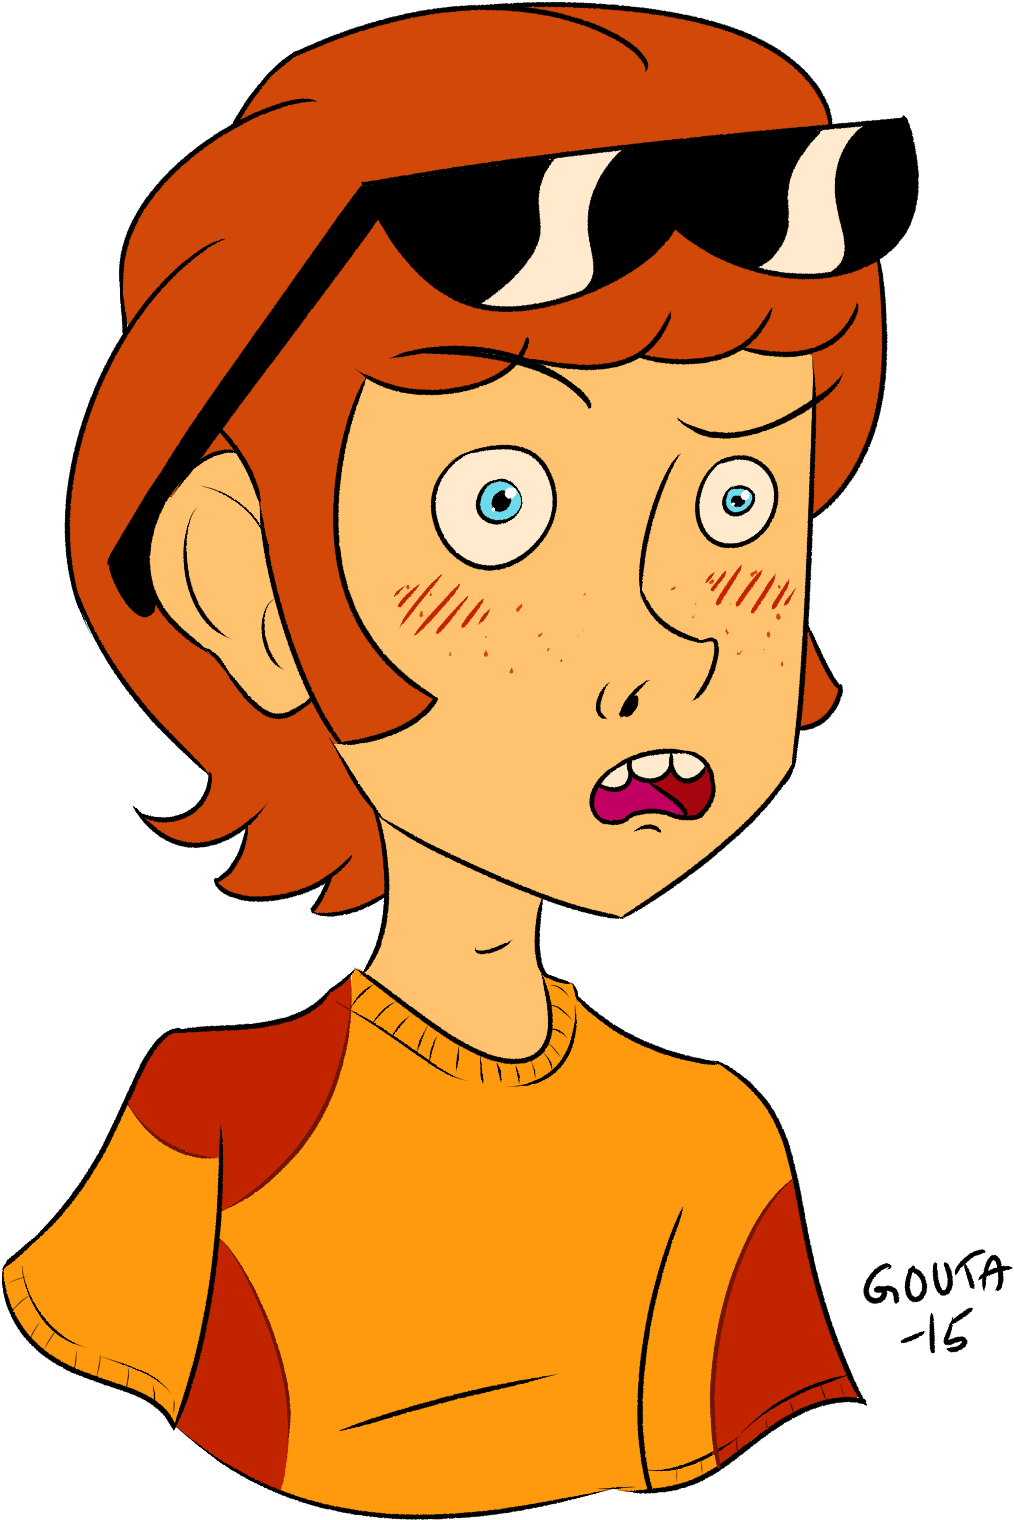 Cartoon Of A Boy With Horns And Orange Shirt